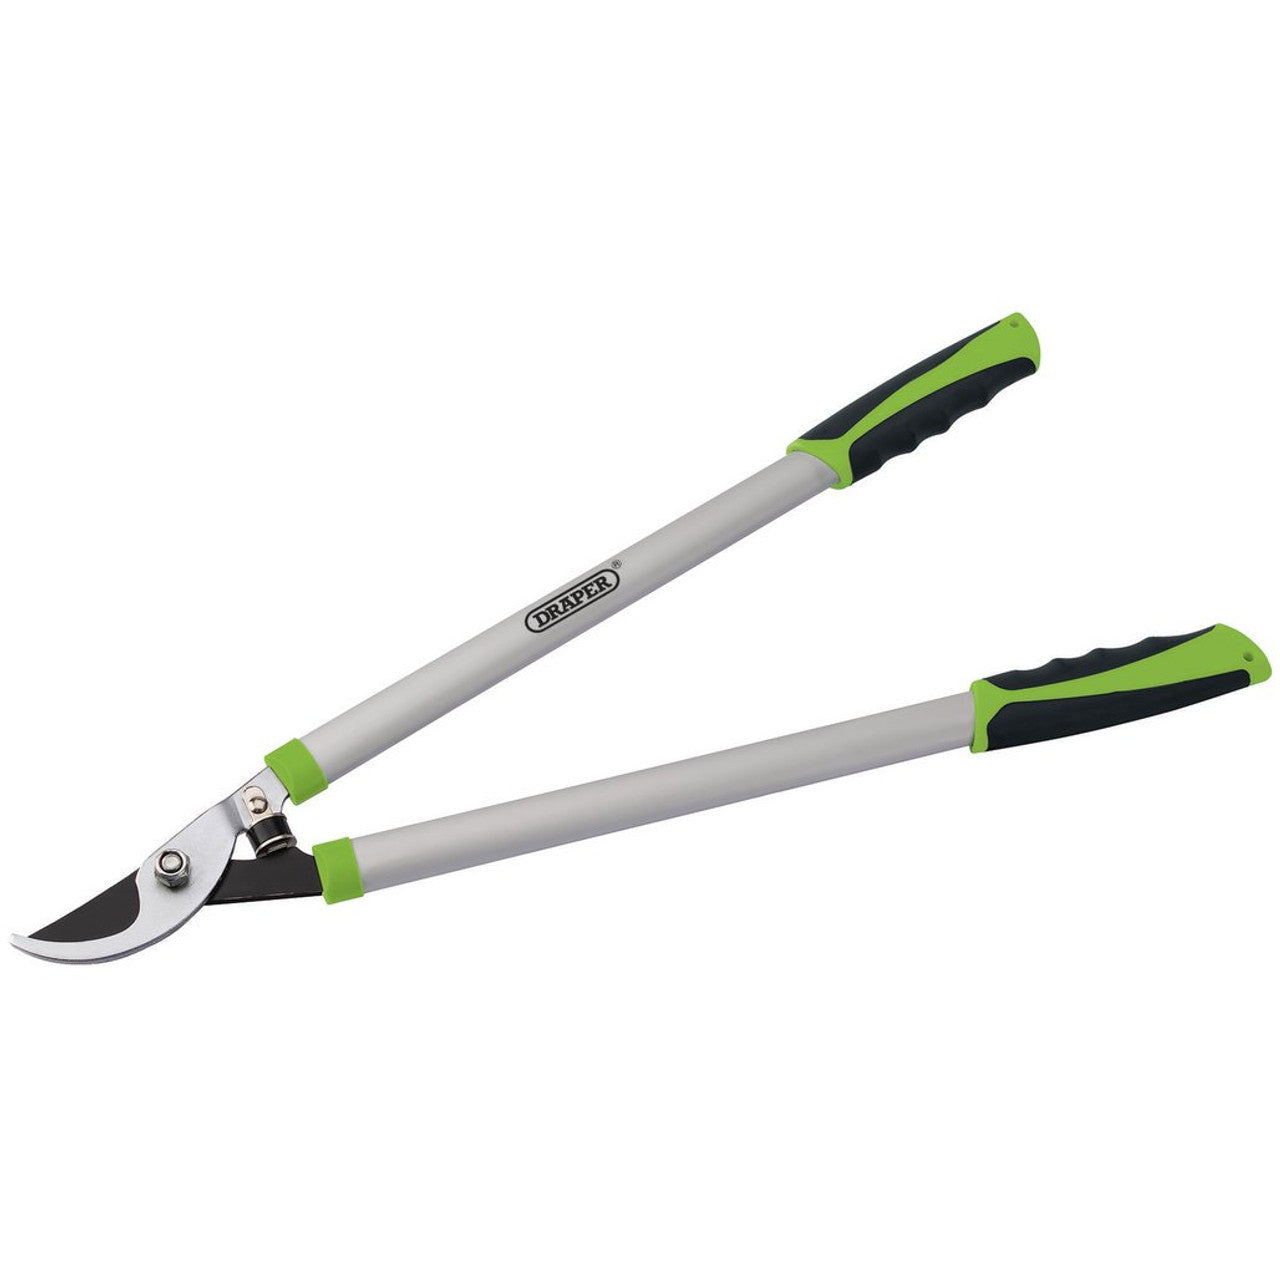 Draper 97956 Bypass Loppers